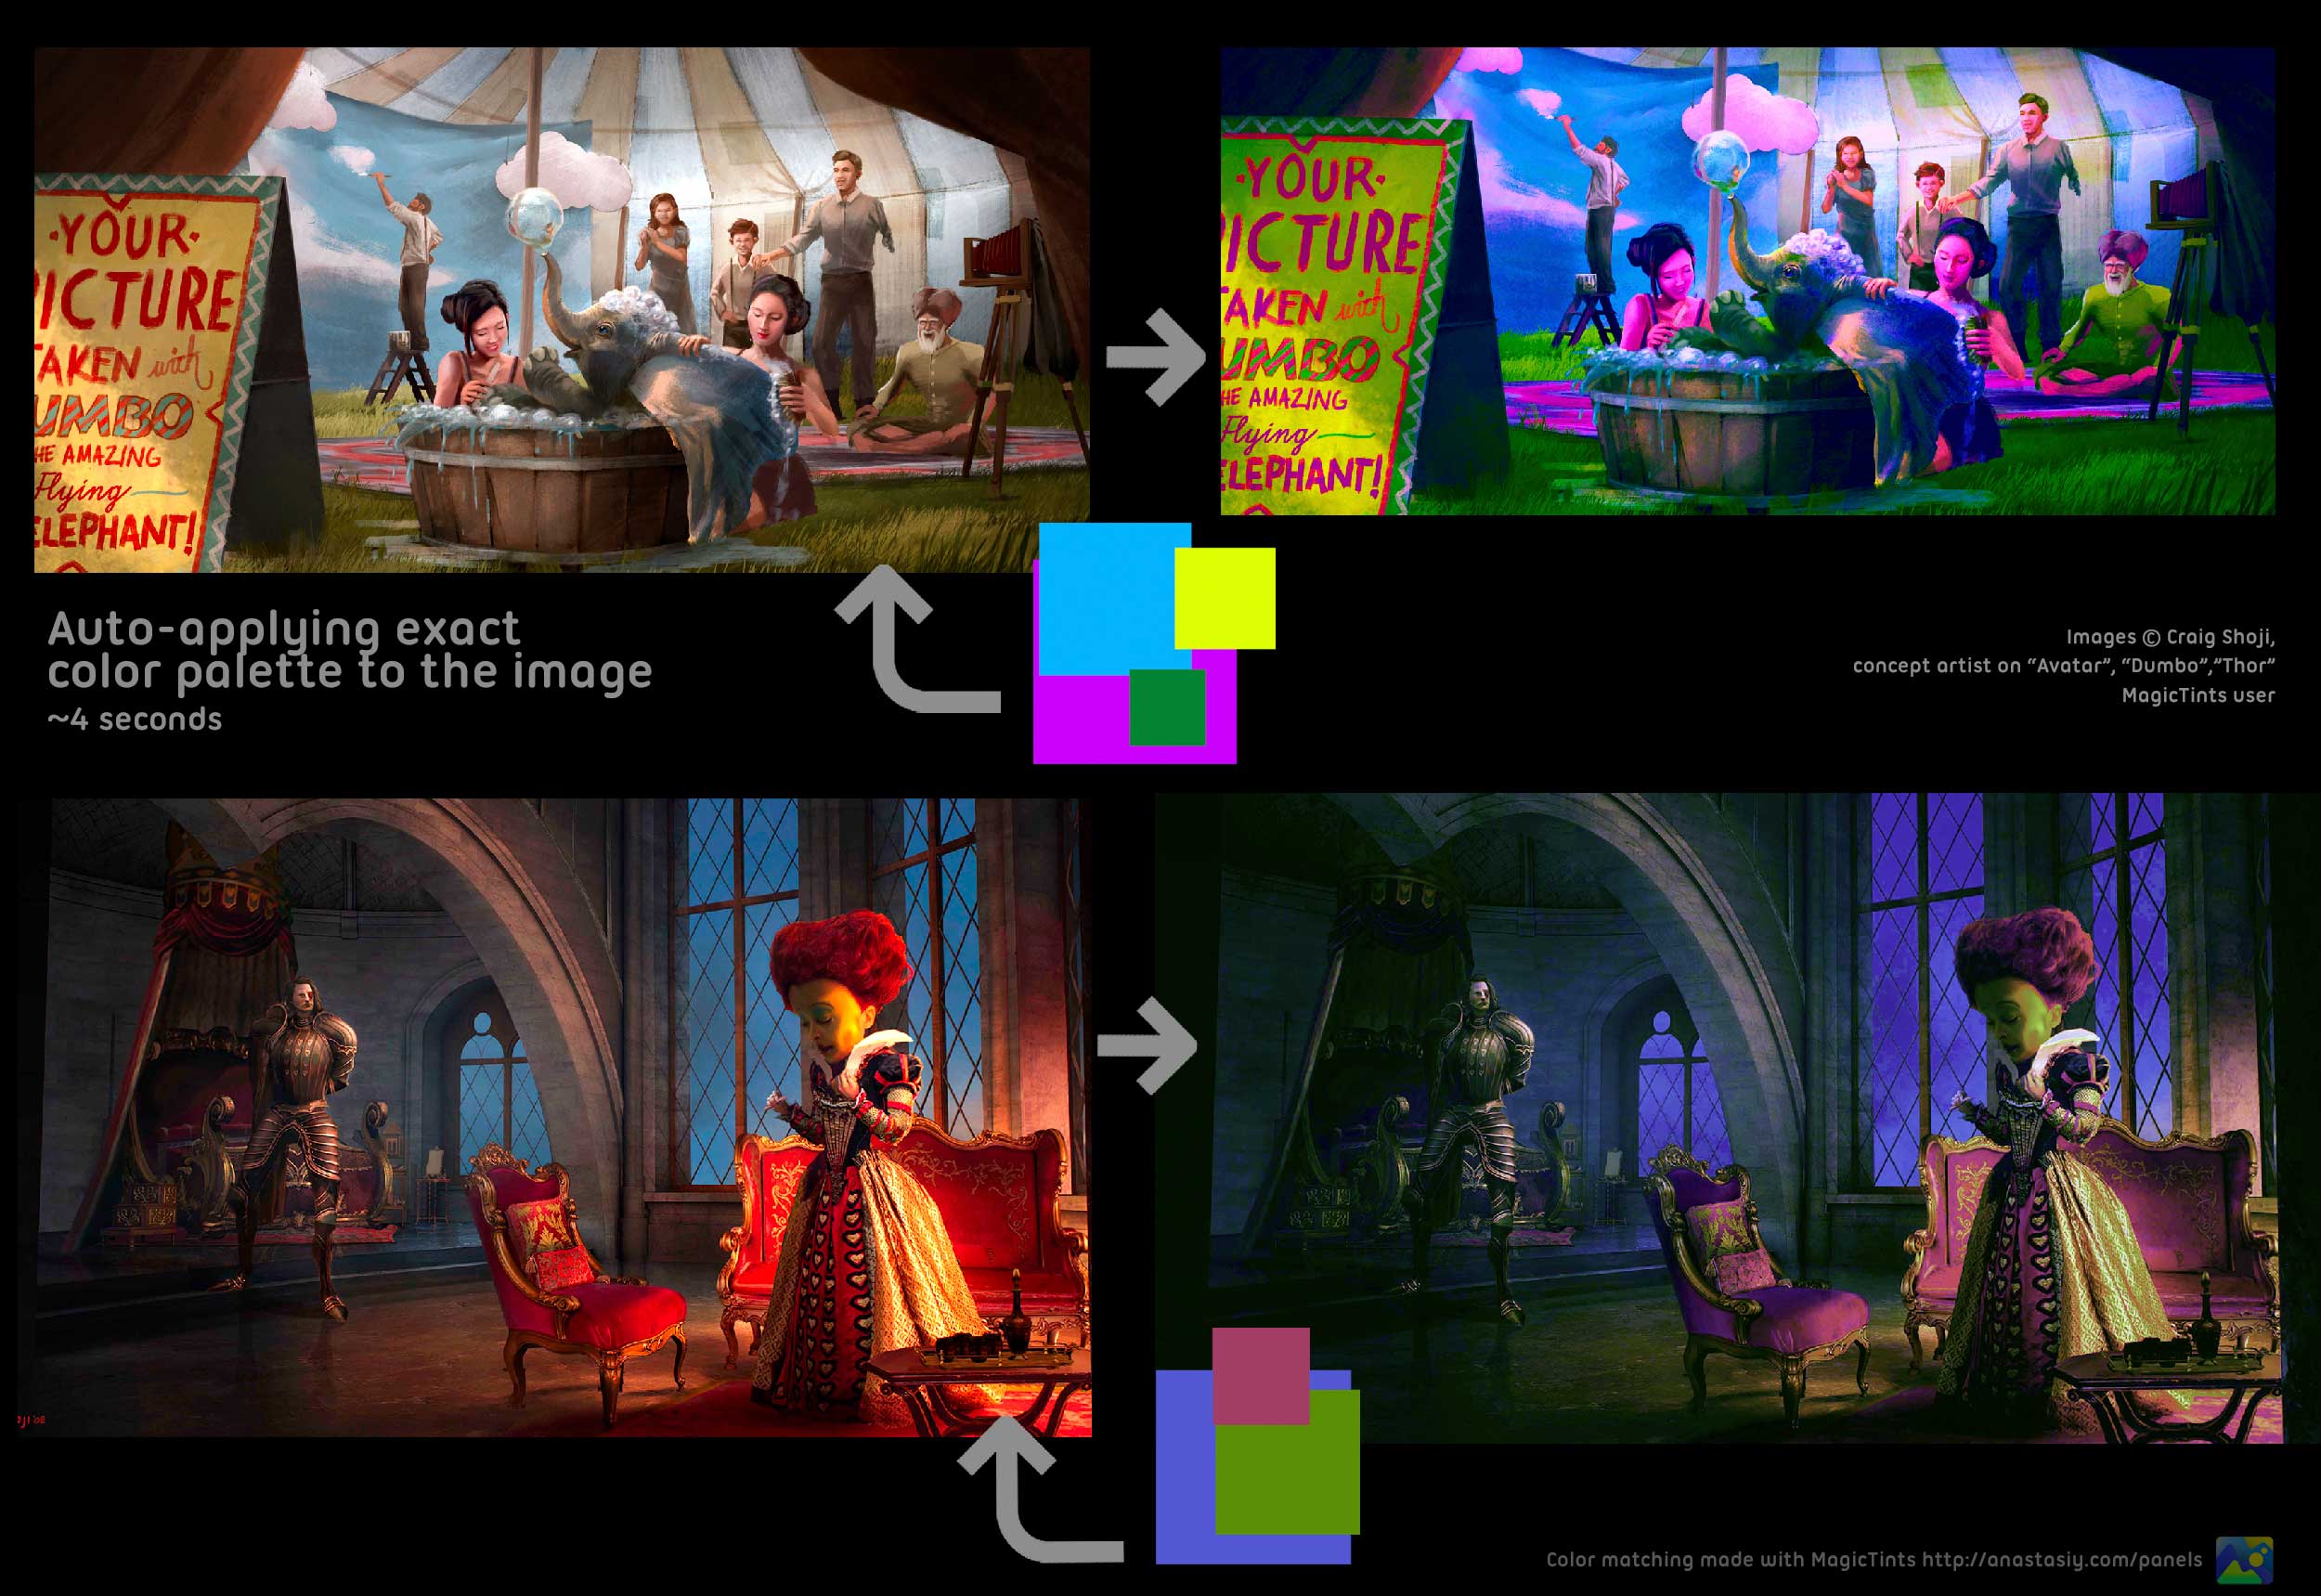 Auto-applying exact color correction to the image with MagicTints